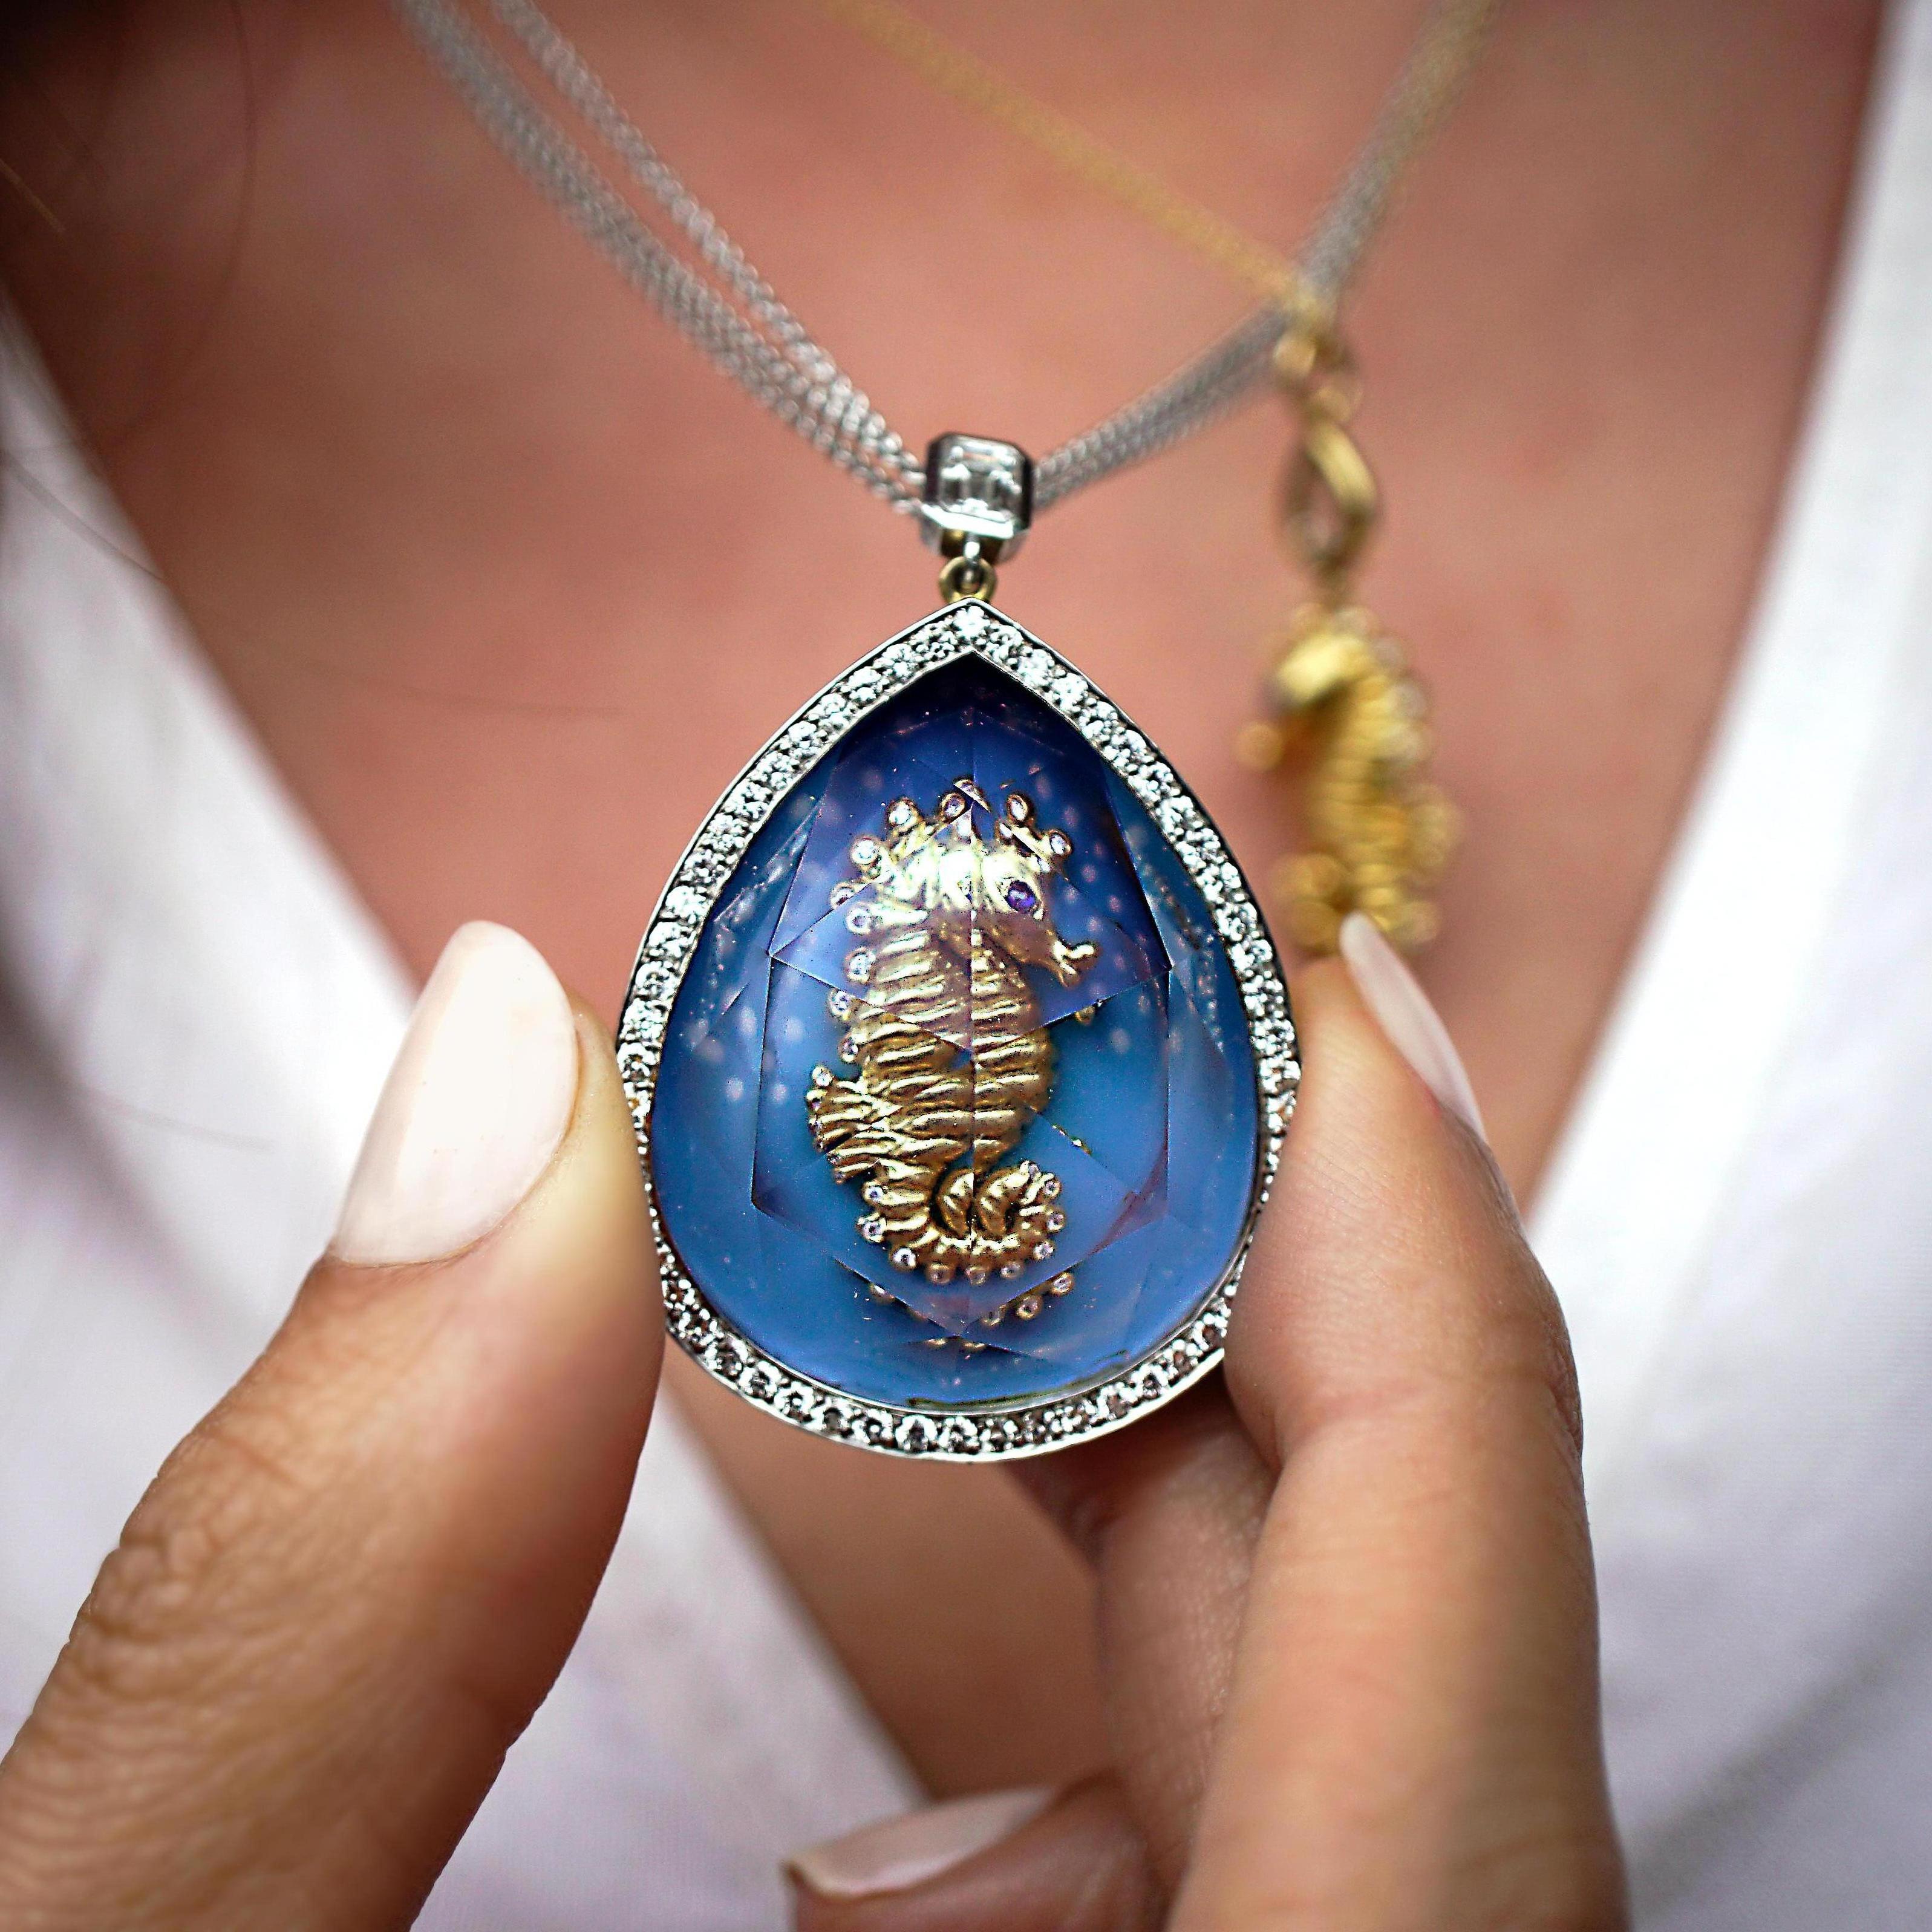 Amy's 45.00ct. Topaz seahorse contemporary designed pendant necklace Aria was created from her sweet memories of growing up sailing to the Catalina Islands with her siblings year after year.  By joining her love of the sea with jewels from the sand,